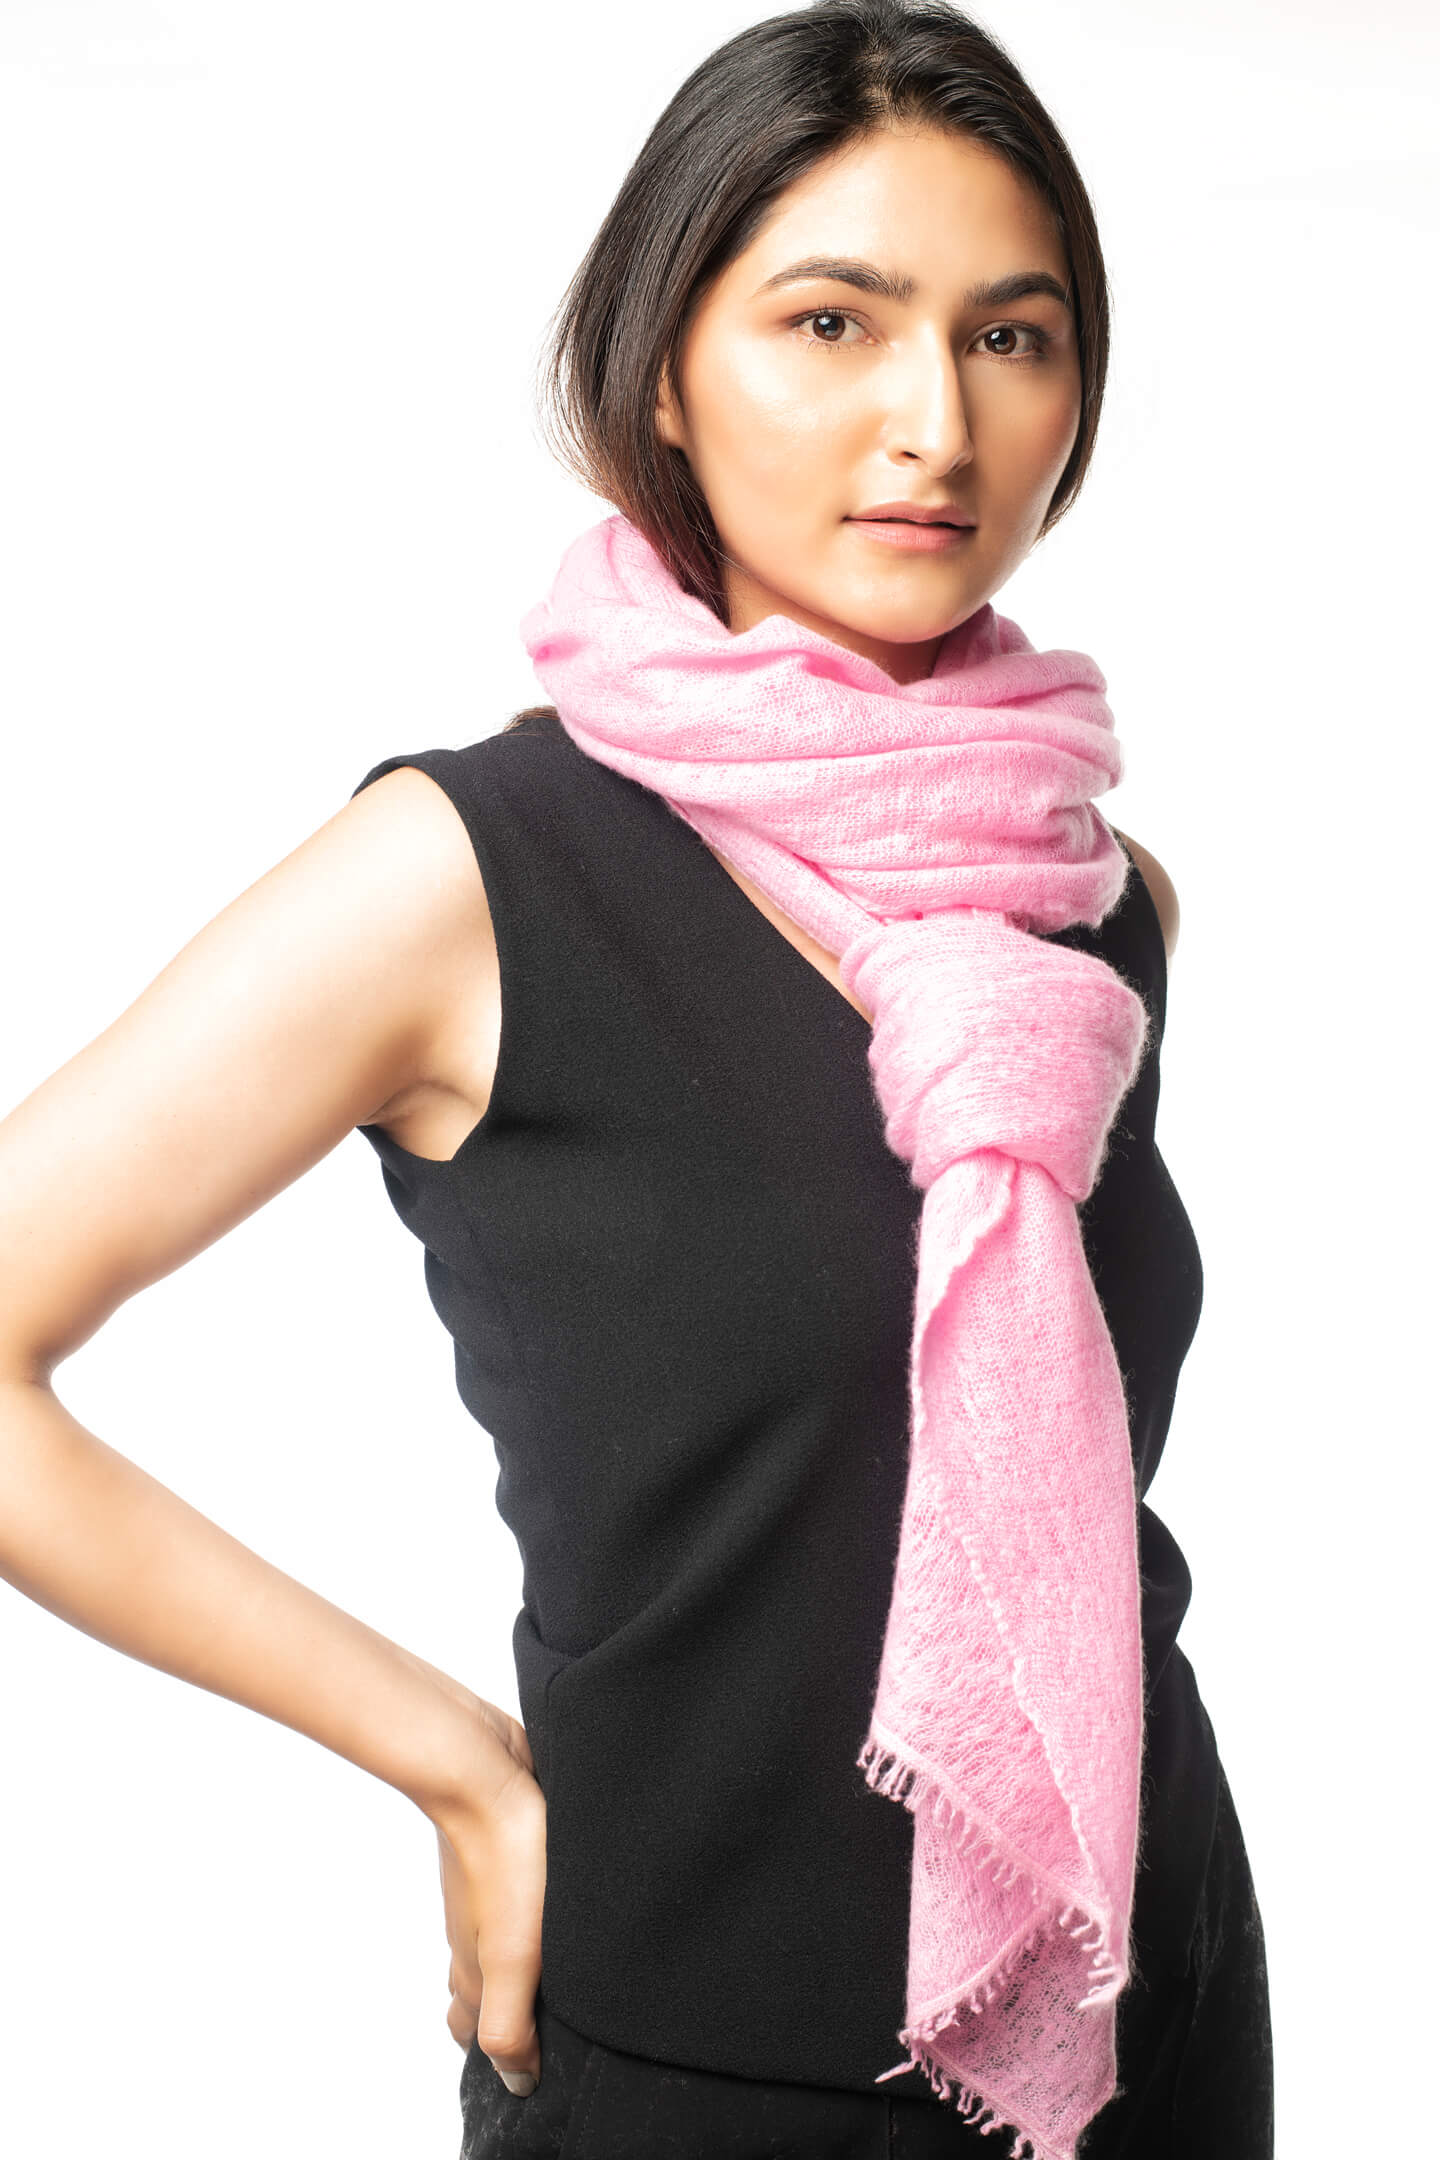 Pink Cashmere Scarf Hand Knitted From Pure Cashmere Makes An Unforgettable Impression